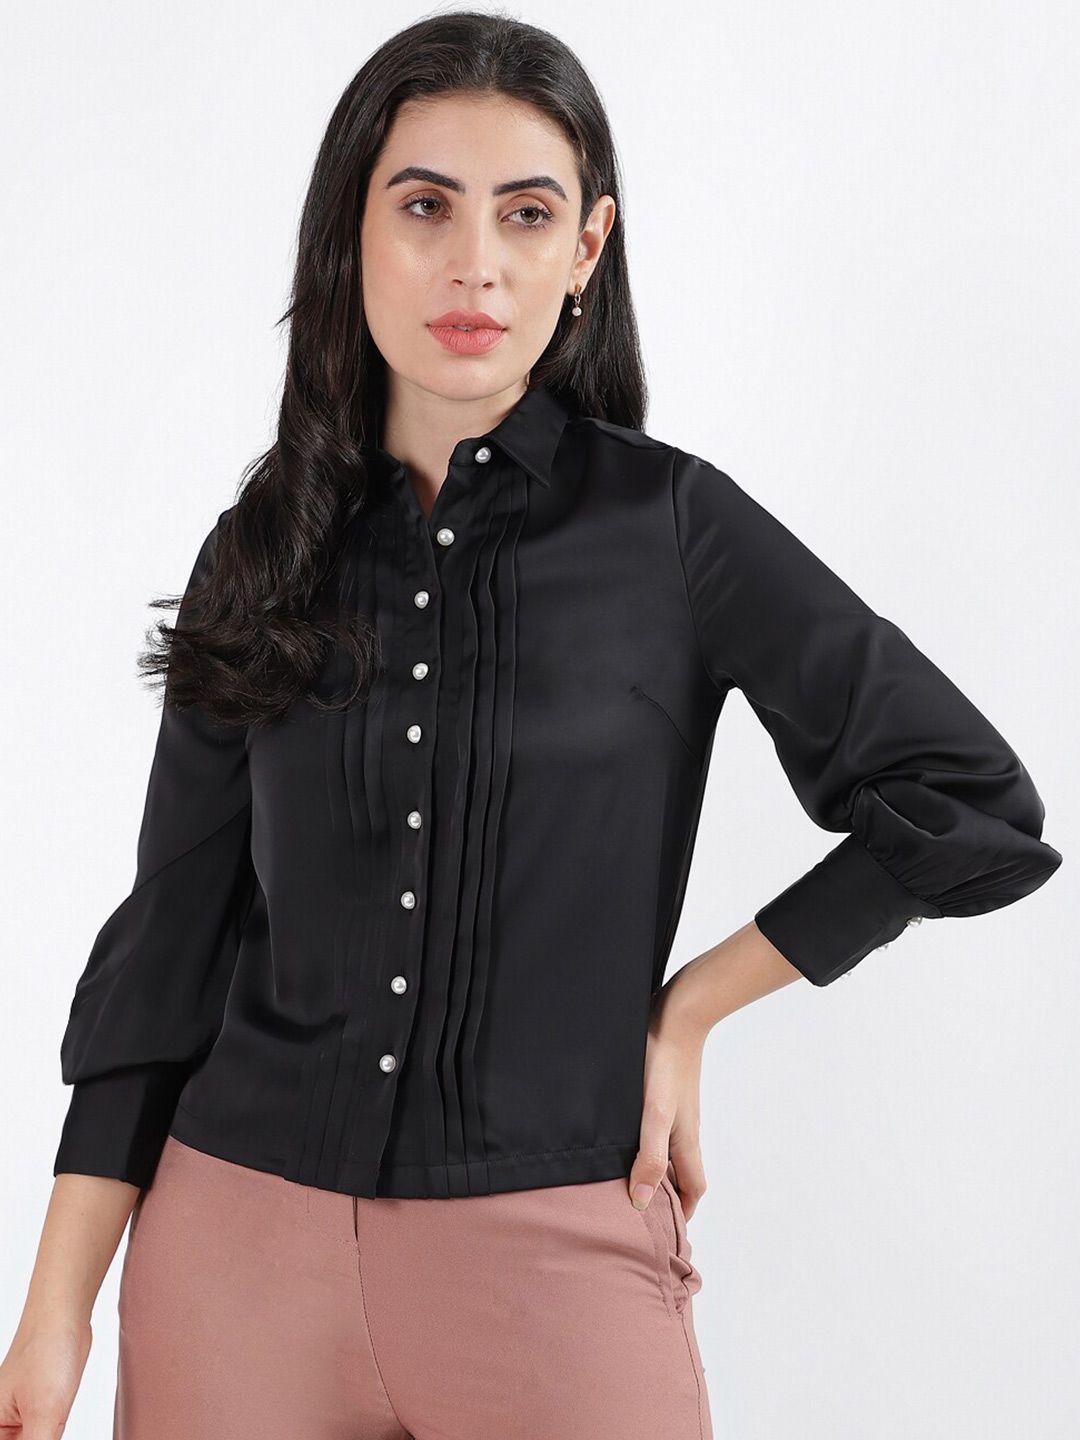 centrestage spread collar long sleeves pleated casual shirt